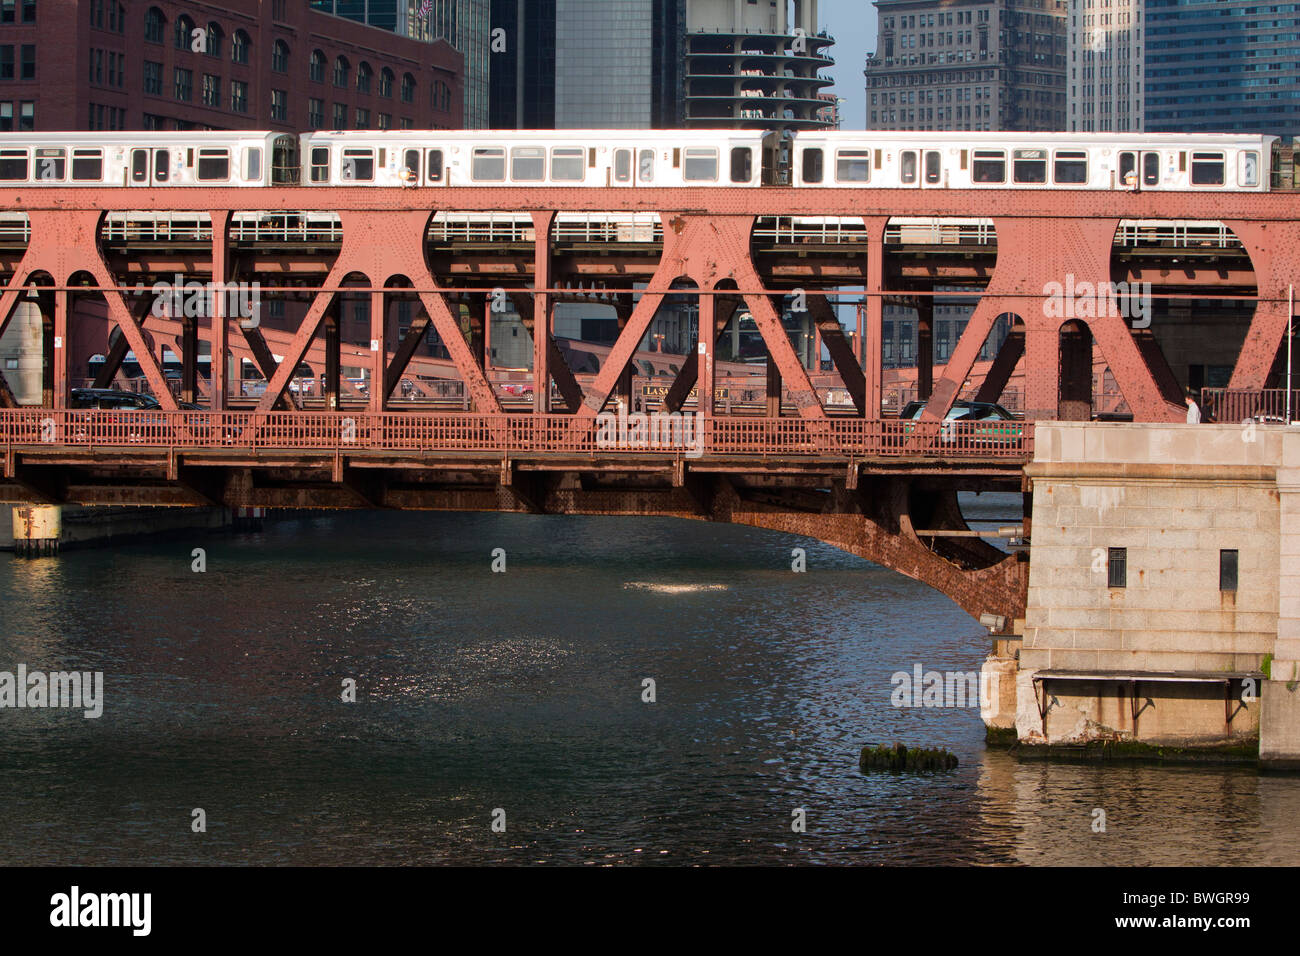 The famous Chicago L train rattles over the Well Street bridge above the Chicago River. Stock Photo